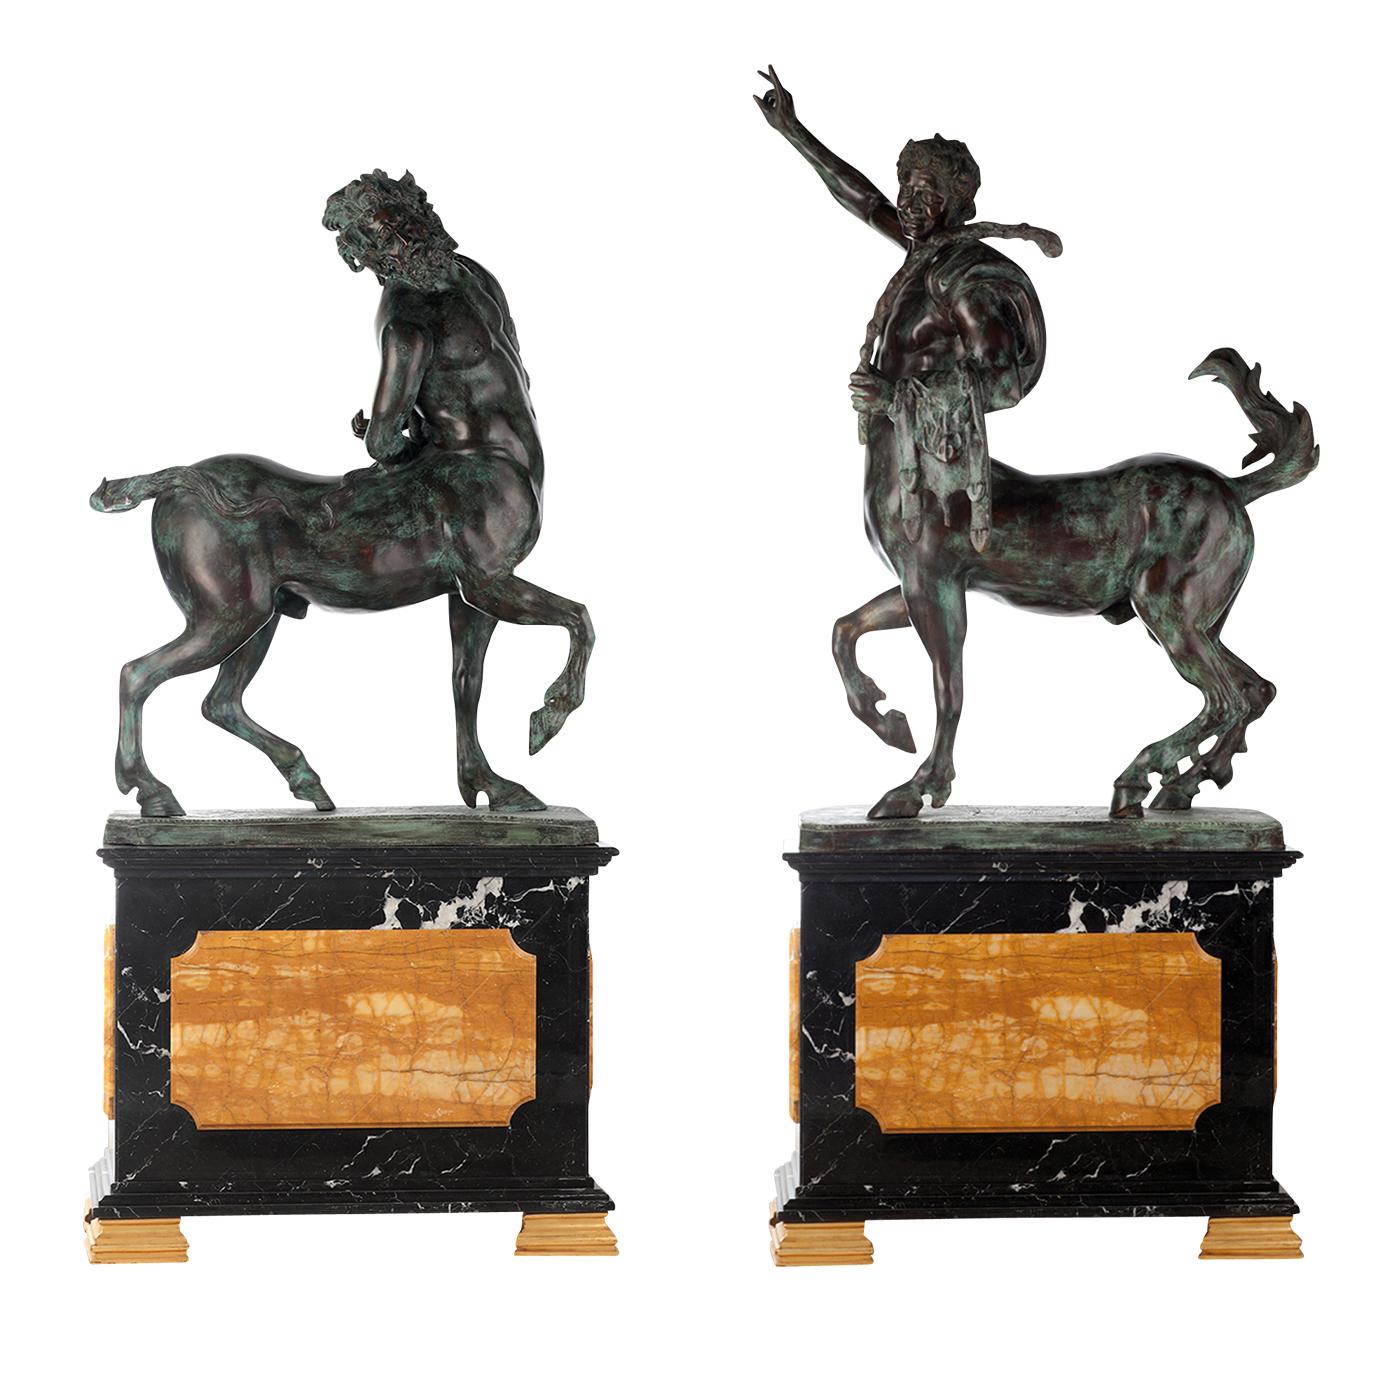 These two statuettes are inspired by ancient mythology and depict the traditional centaur, half man and half horse. Each statue rests on a classically-shaped pedestal in black marble with striking inserts and feet in yellow marble. The bronze